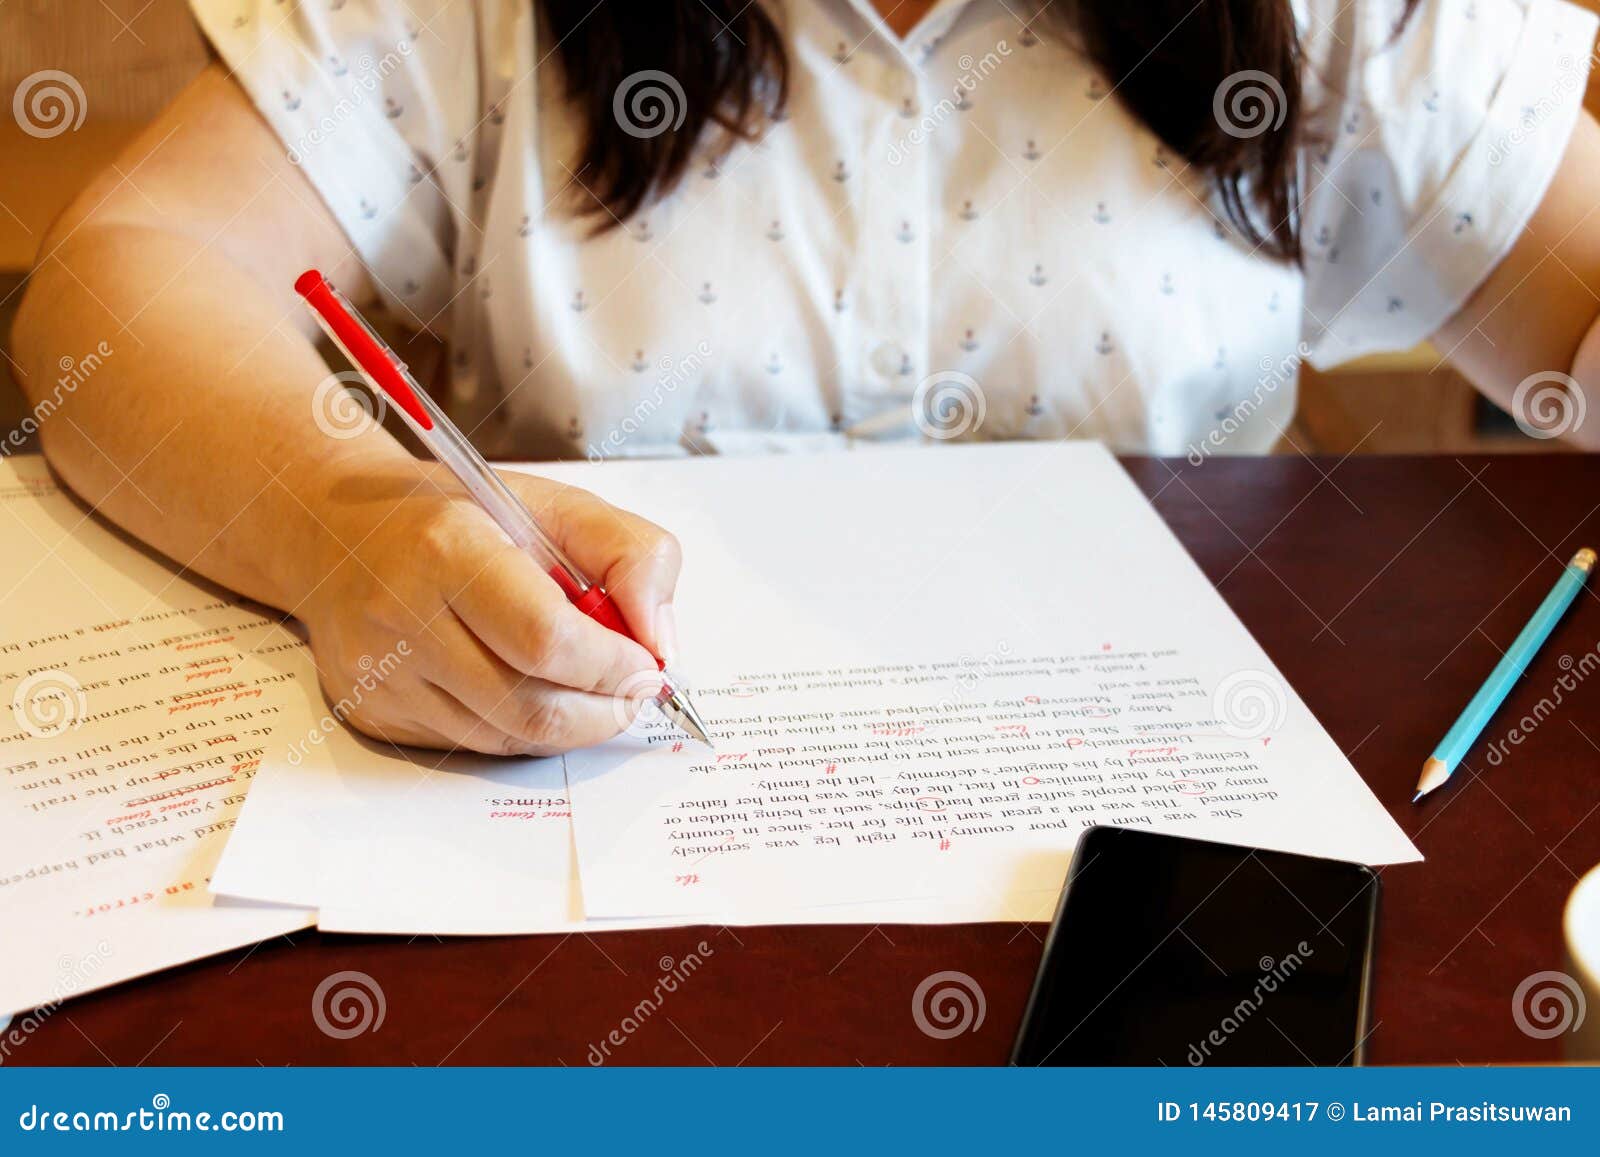  Proofreading  Paper  On Table Stock Image Image of 